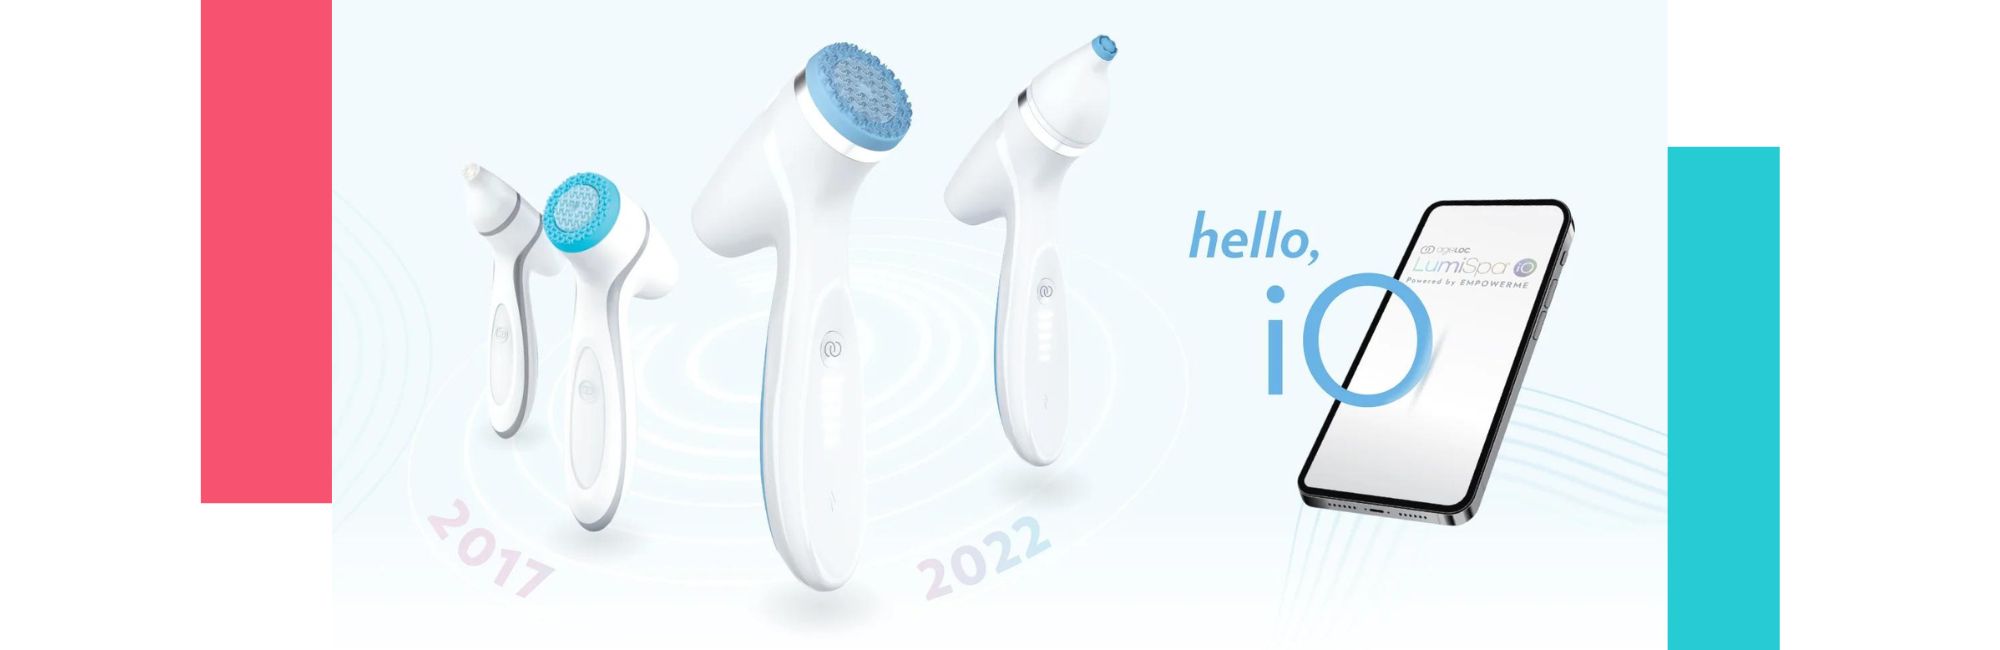 LumiSpa iO is not only an ordinary cleansing device but also an innovative skin care system equipped with unique technology. With Micropulse Oscillation Technology, pore-tightening action and treatment head that moves at precise frequency.